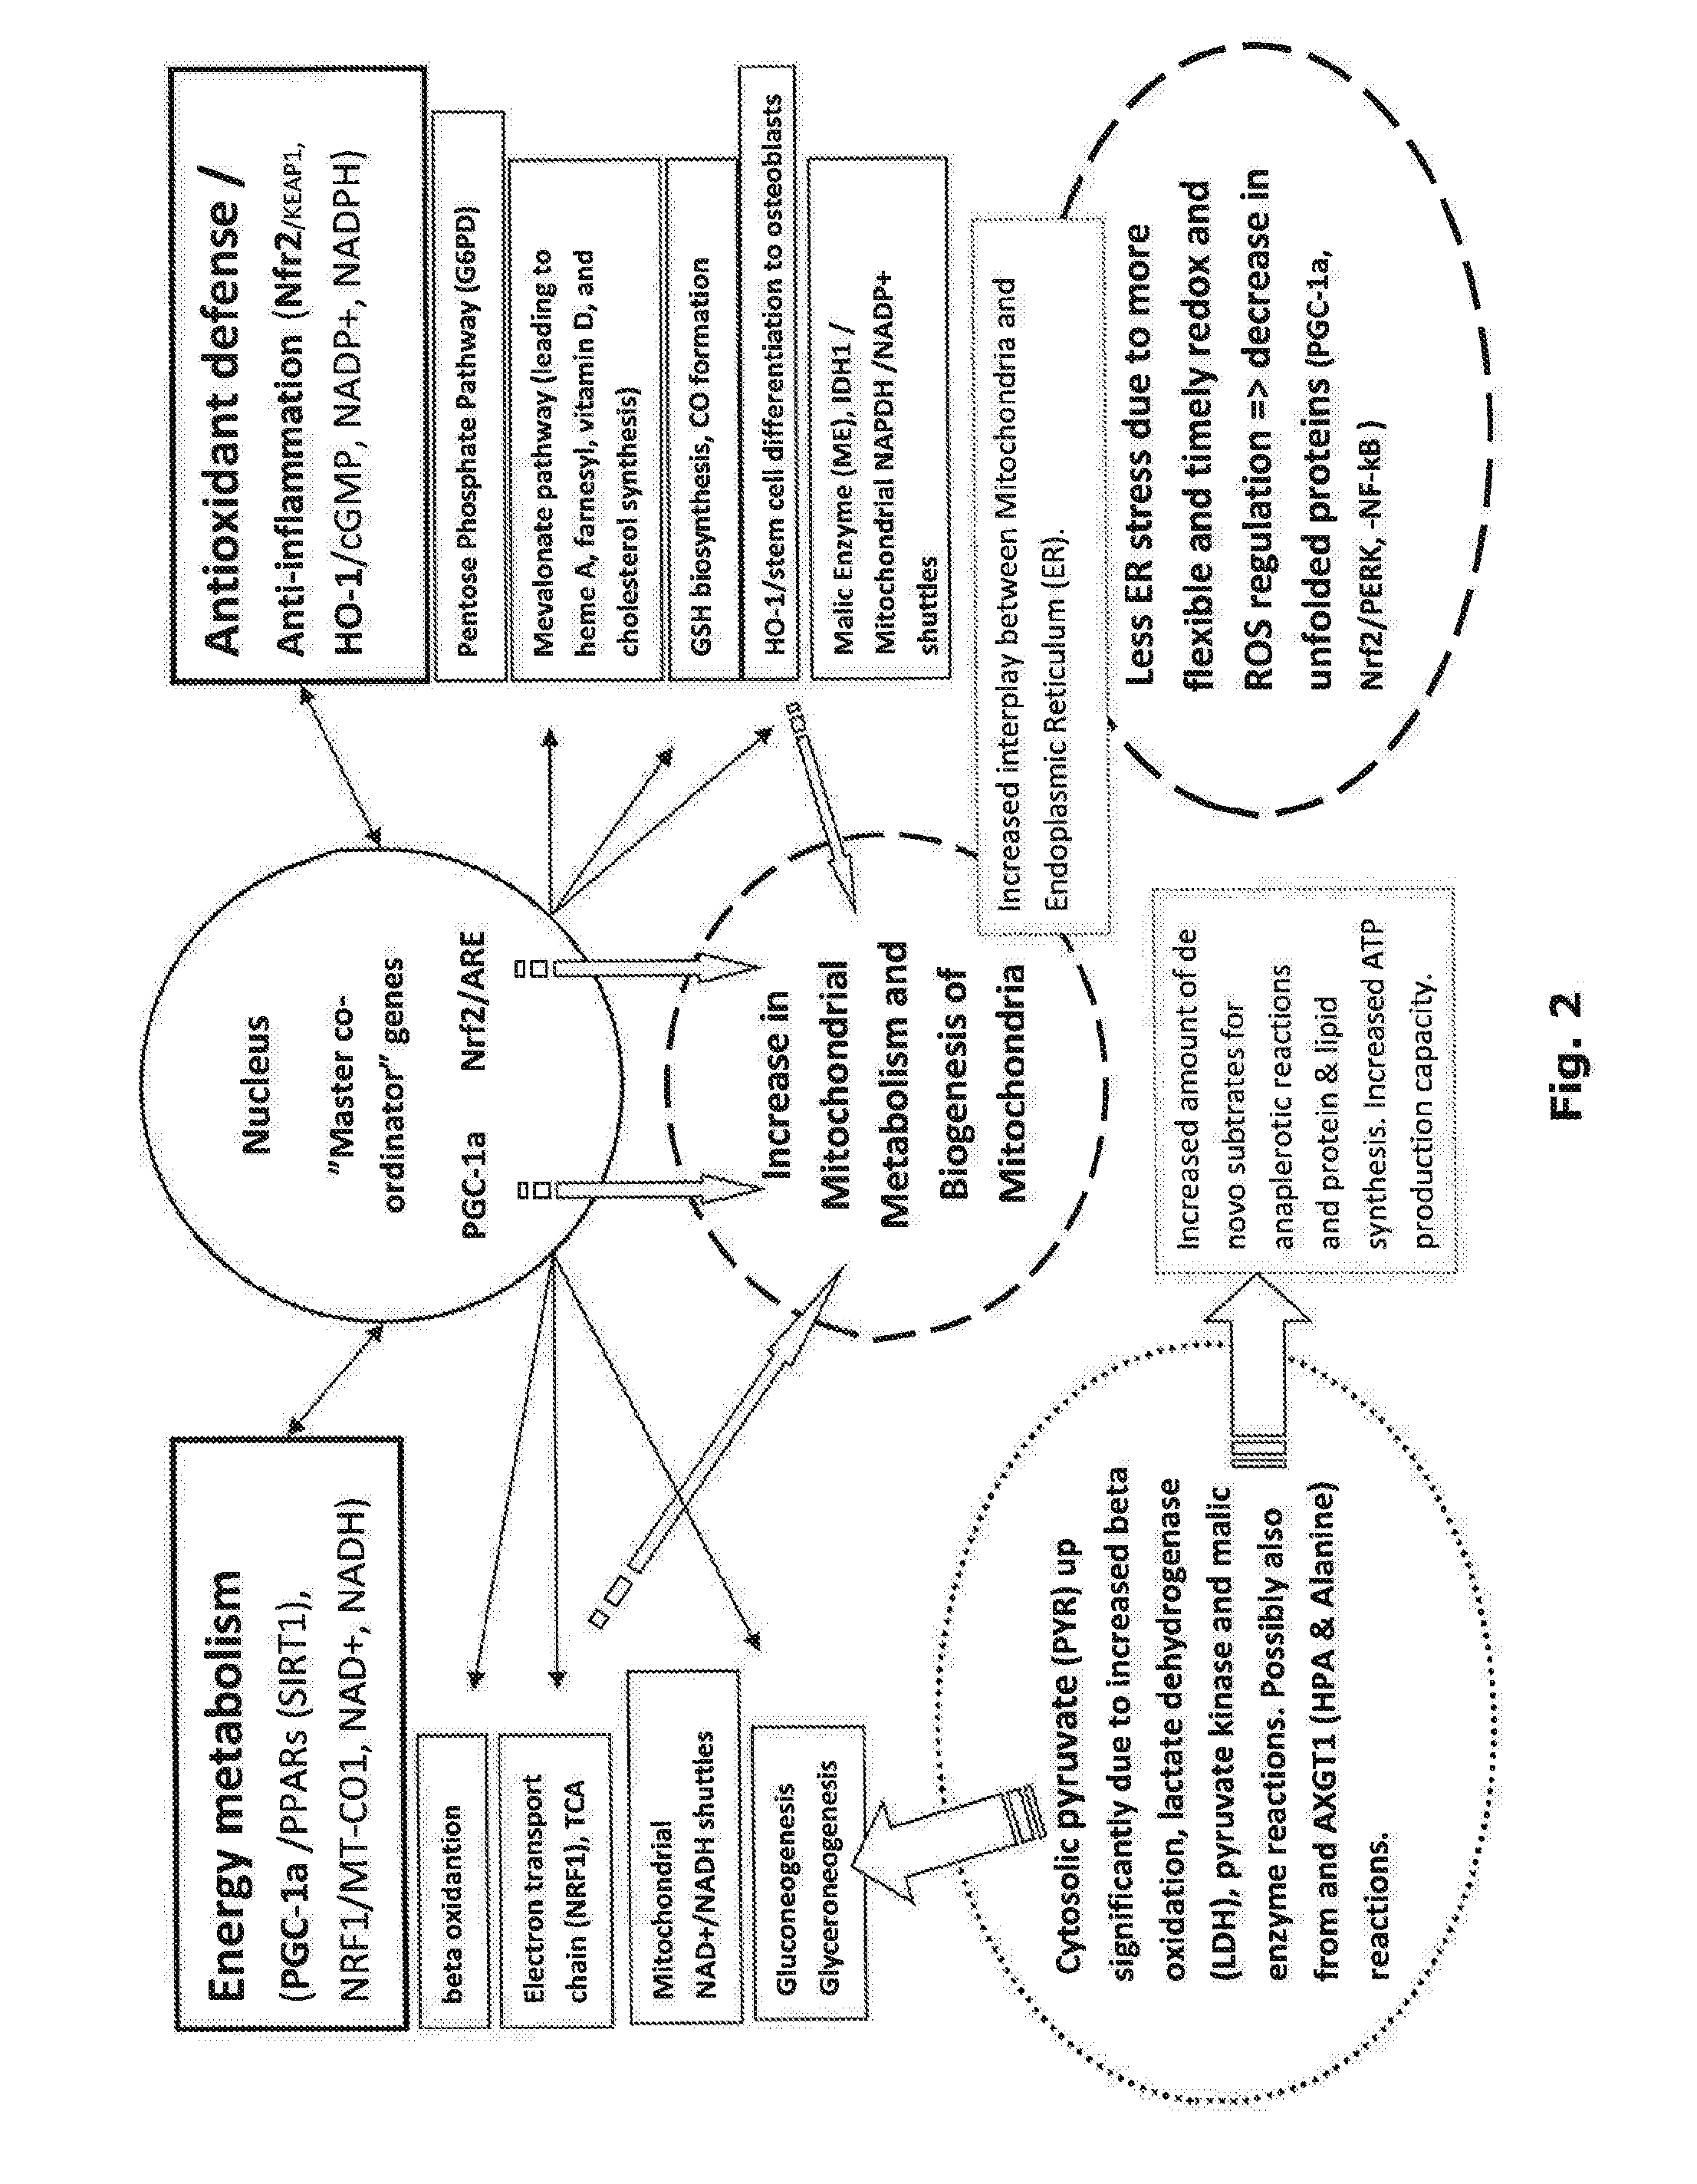 Method for enhancing energy production and metabolism in cells